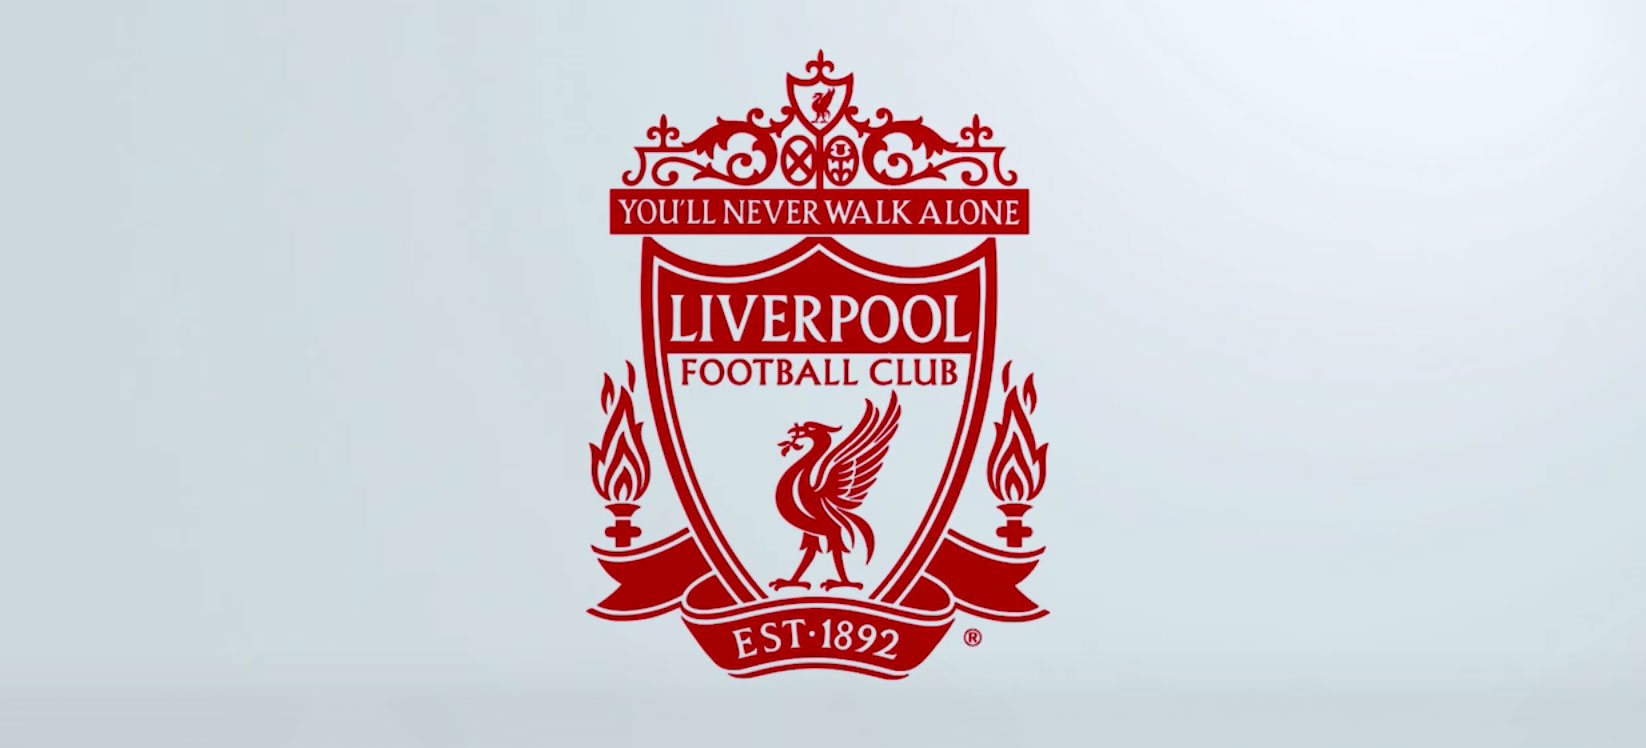 New Lfc Kit To Feature Special 125th Year